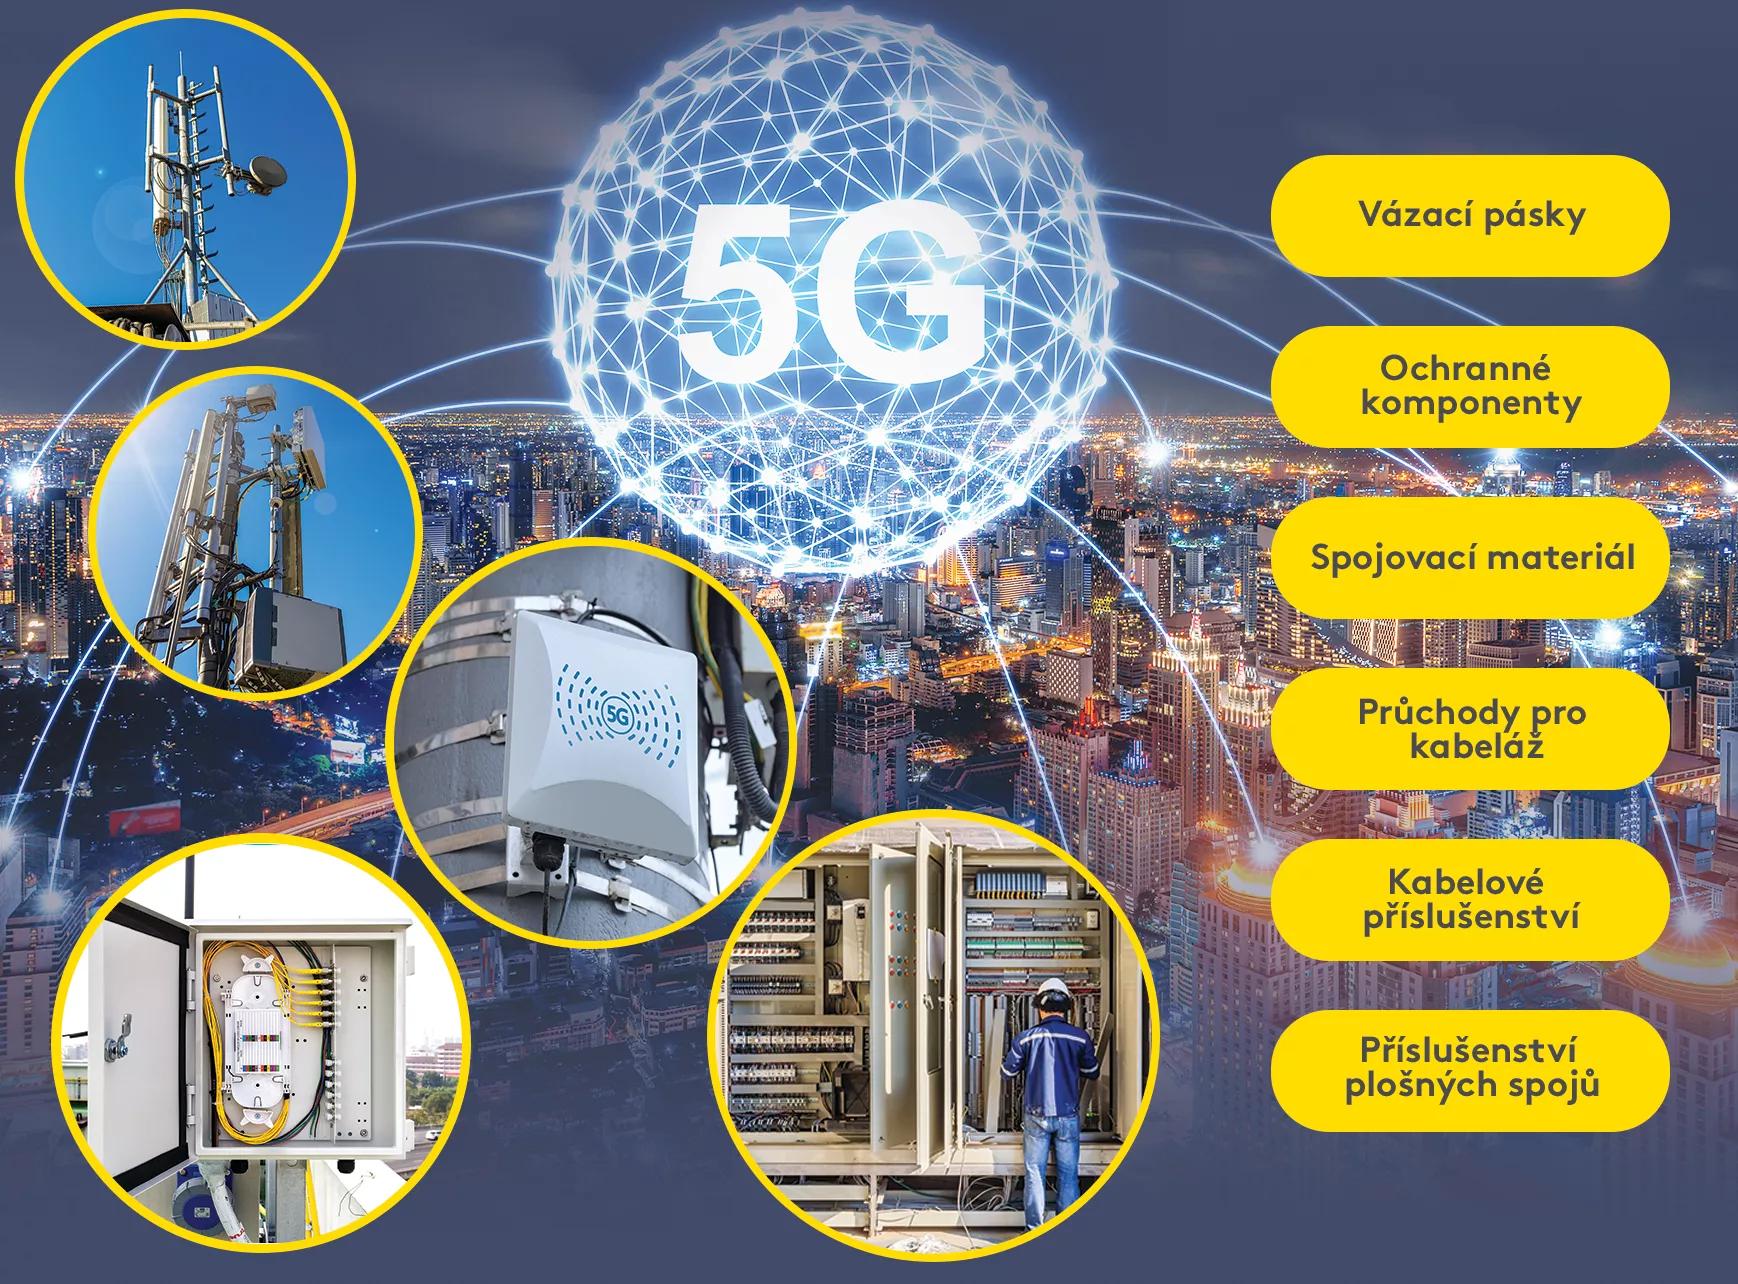 5G network components